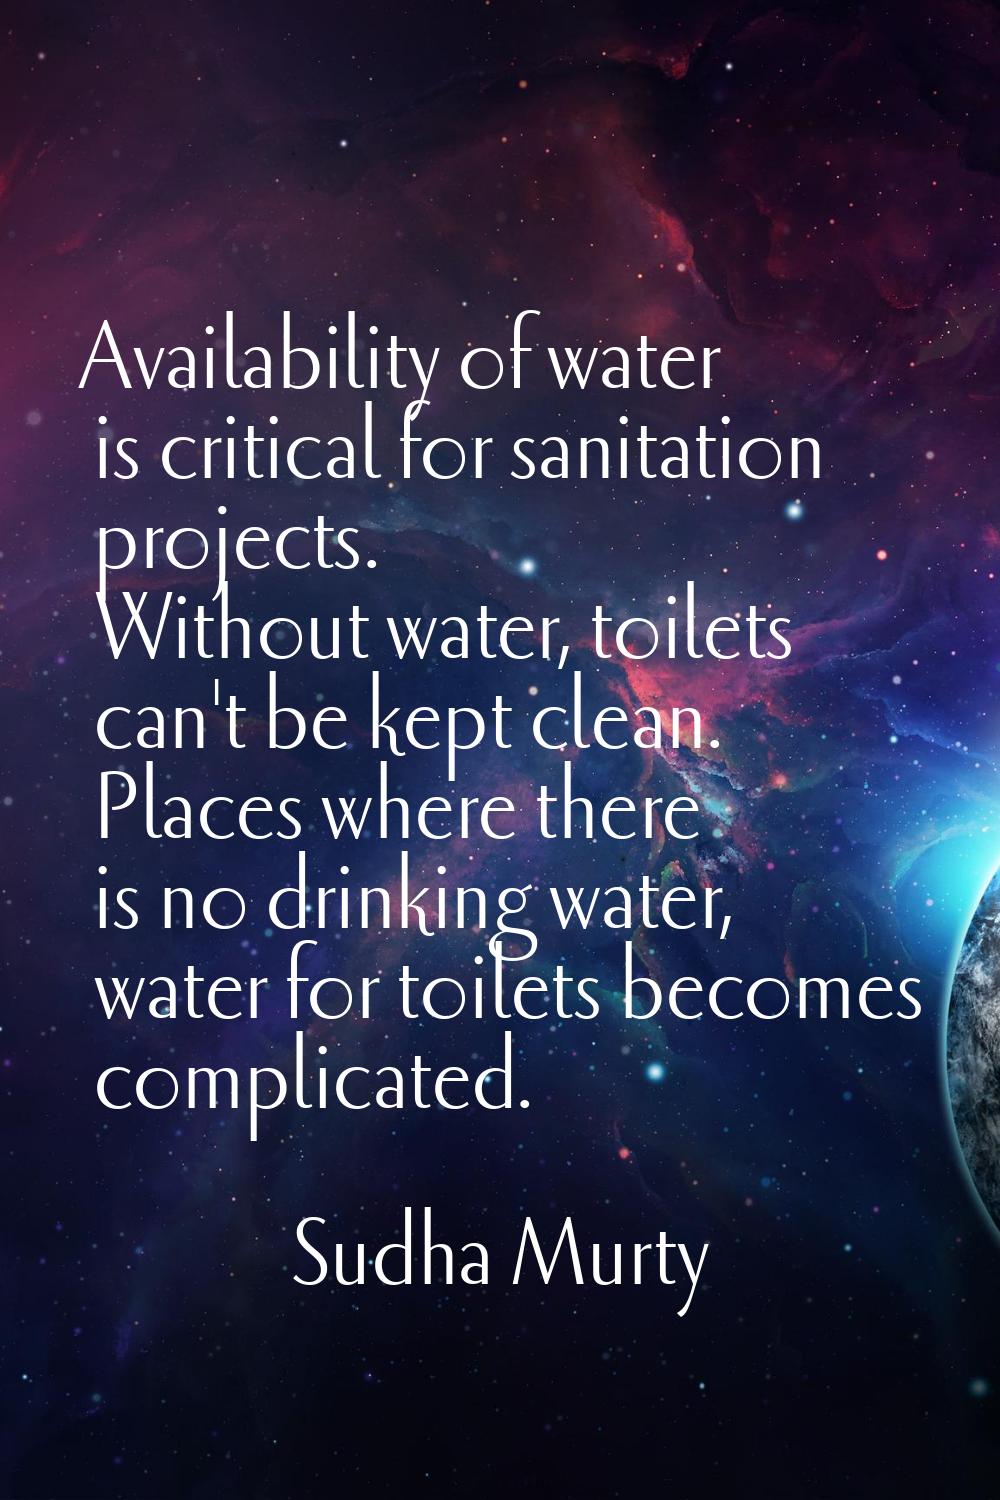 Availability of water is critical for sanitation projects. Without water, toilets can't be kept cle